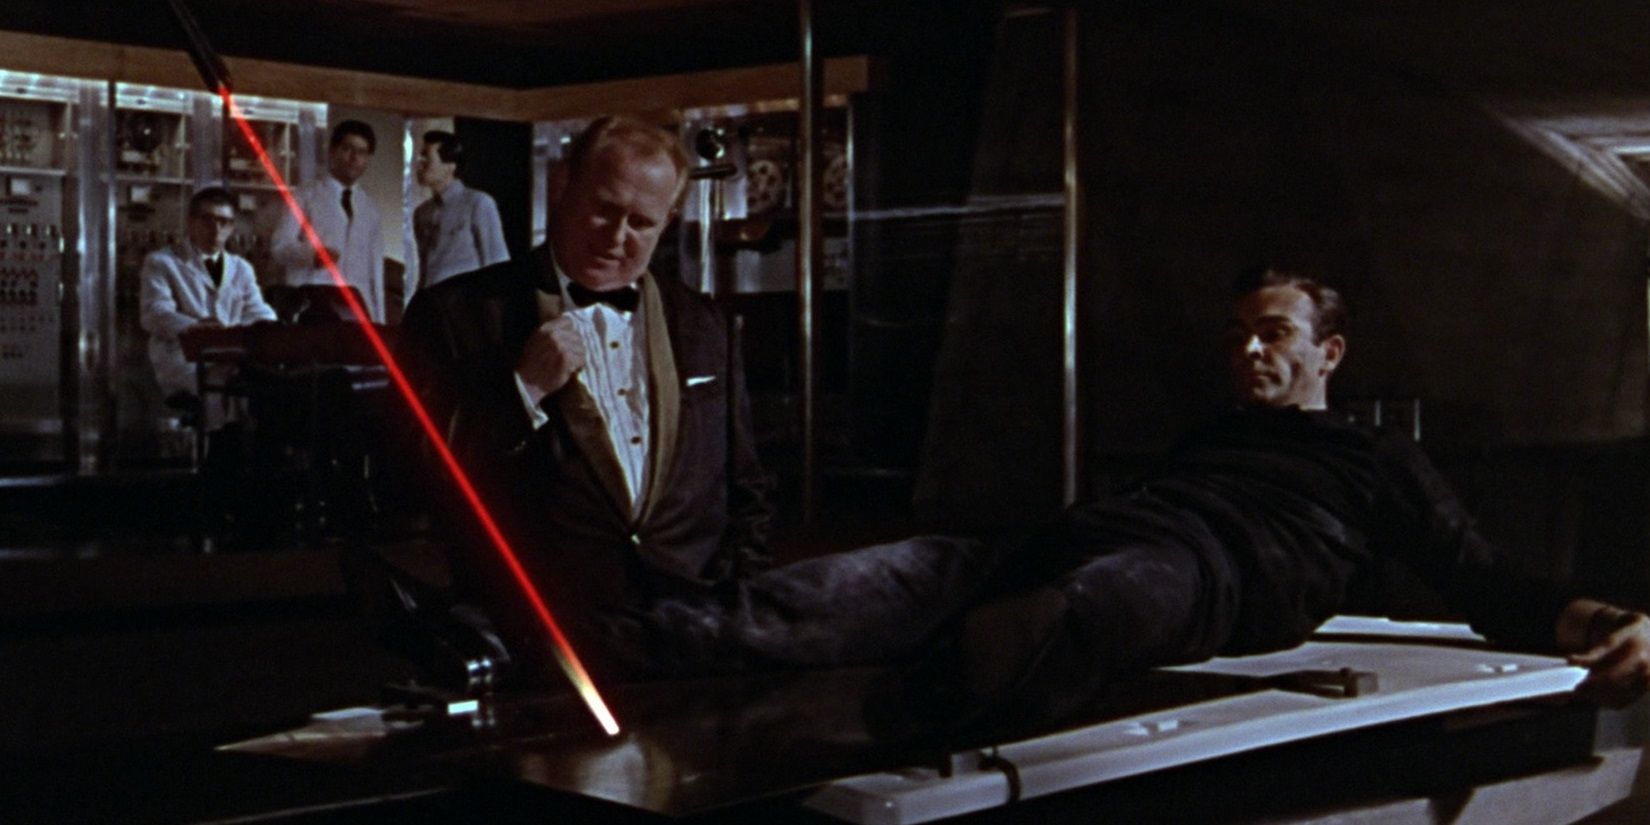 Auric Goldfinger tries to cut Bond in half using a laser